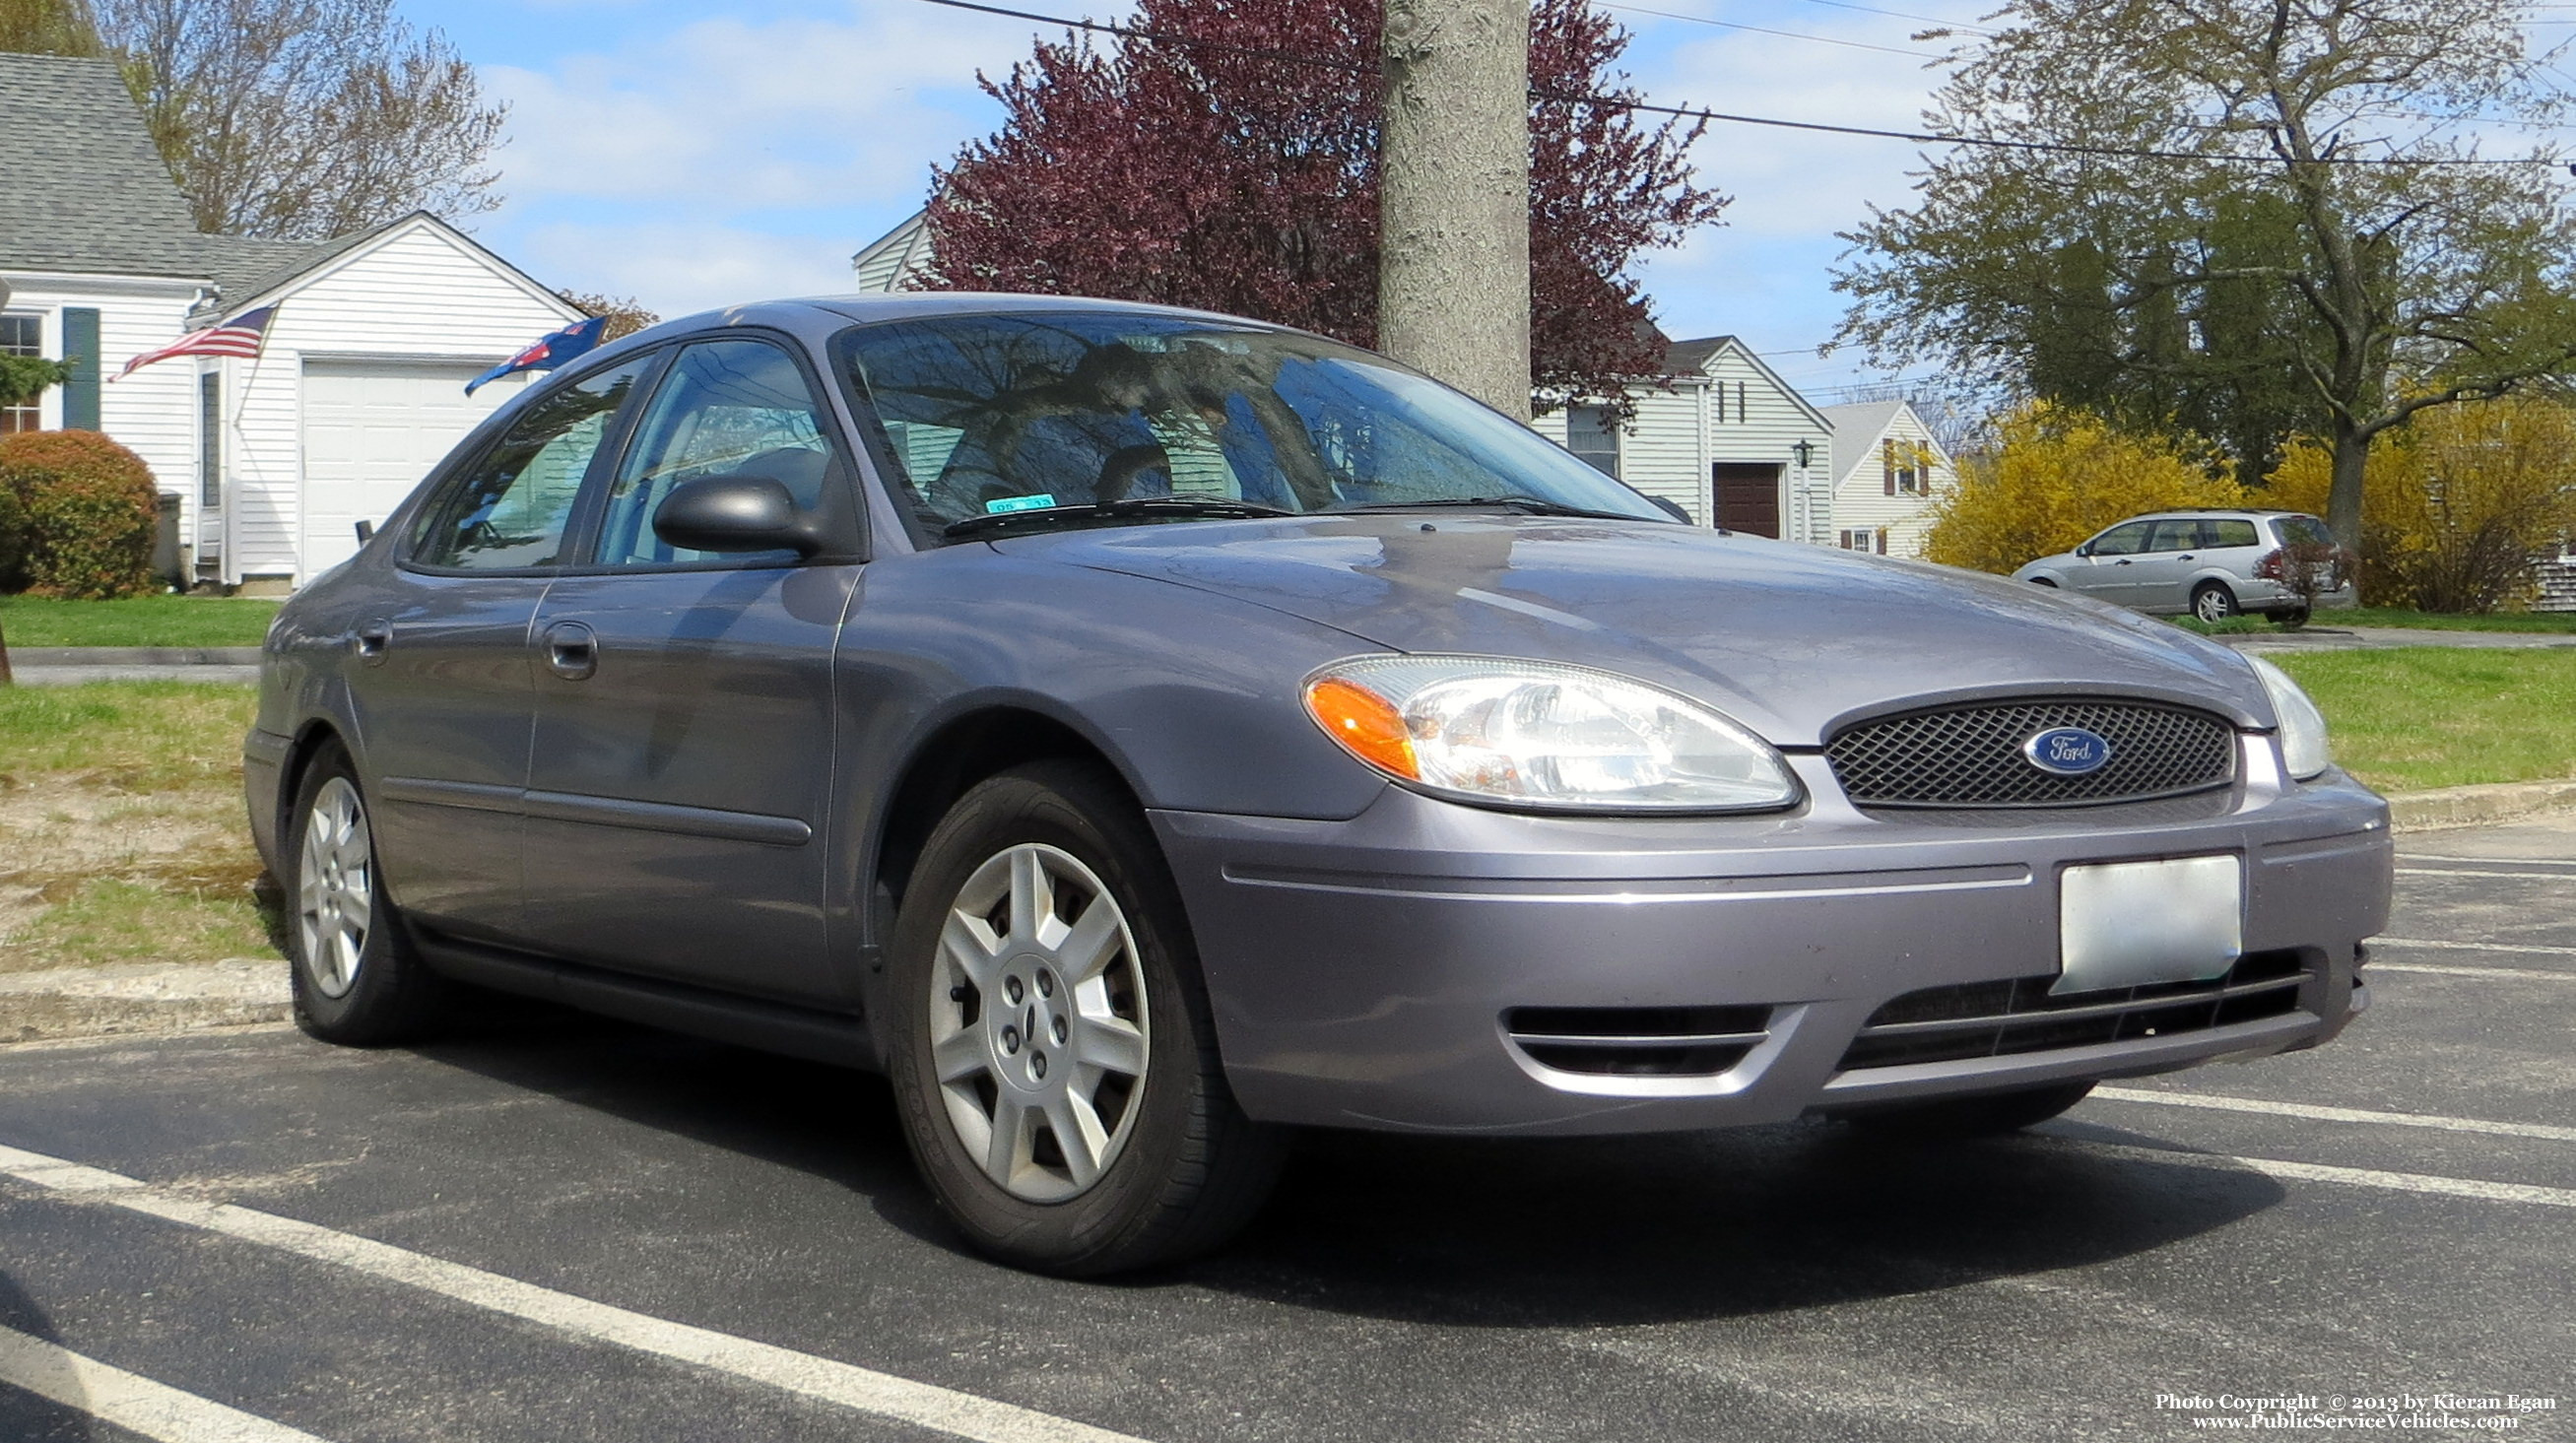 A photo  of Rhode Island State Police
            Unmarked Unit, a 2004-2007 Ford Taurus             taken by Kieran Egan